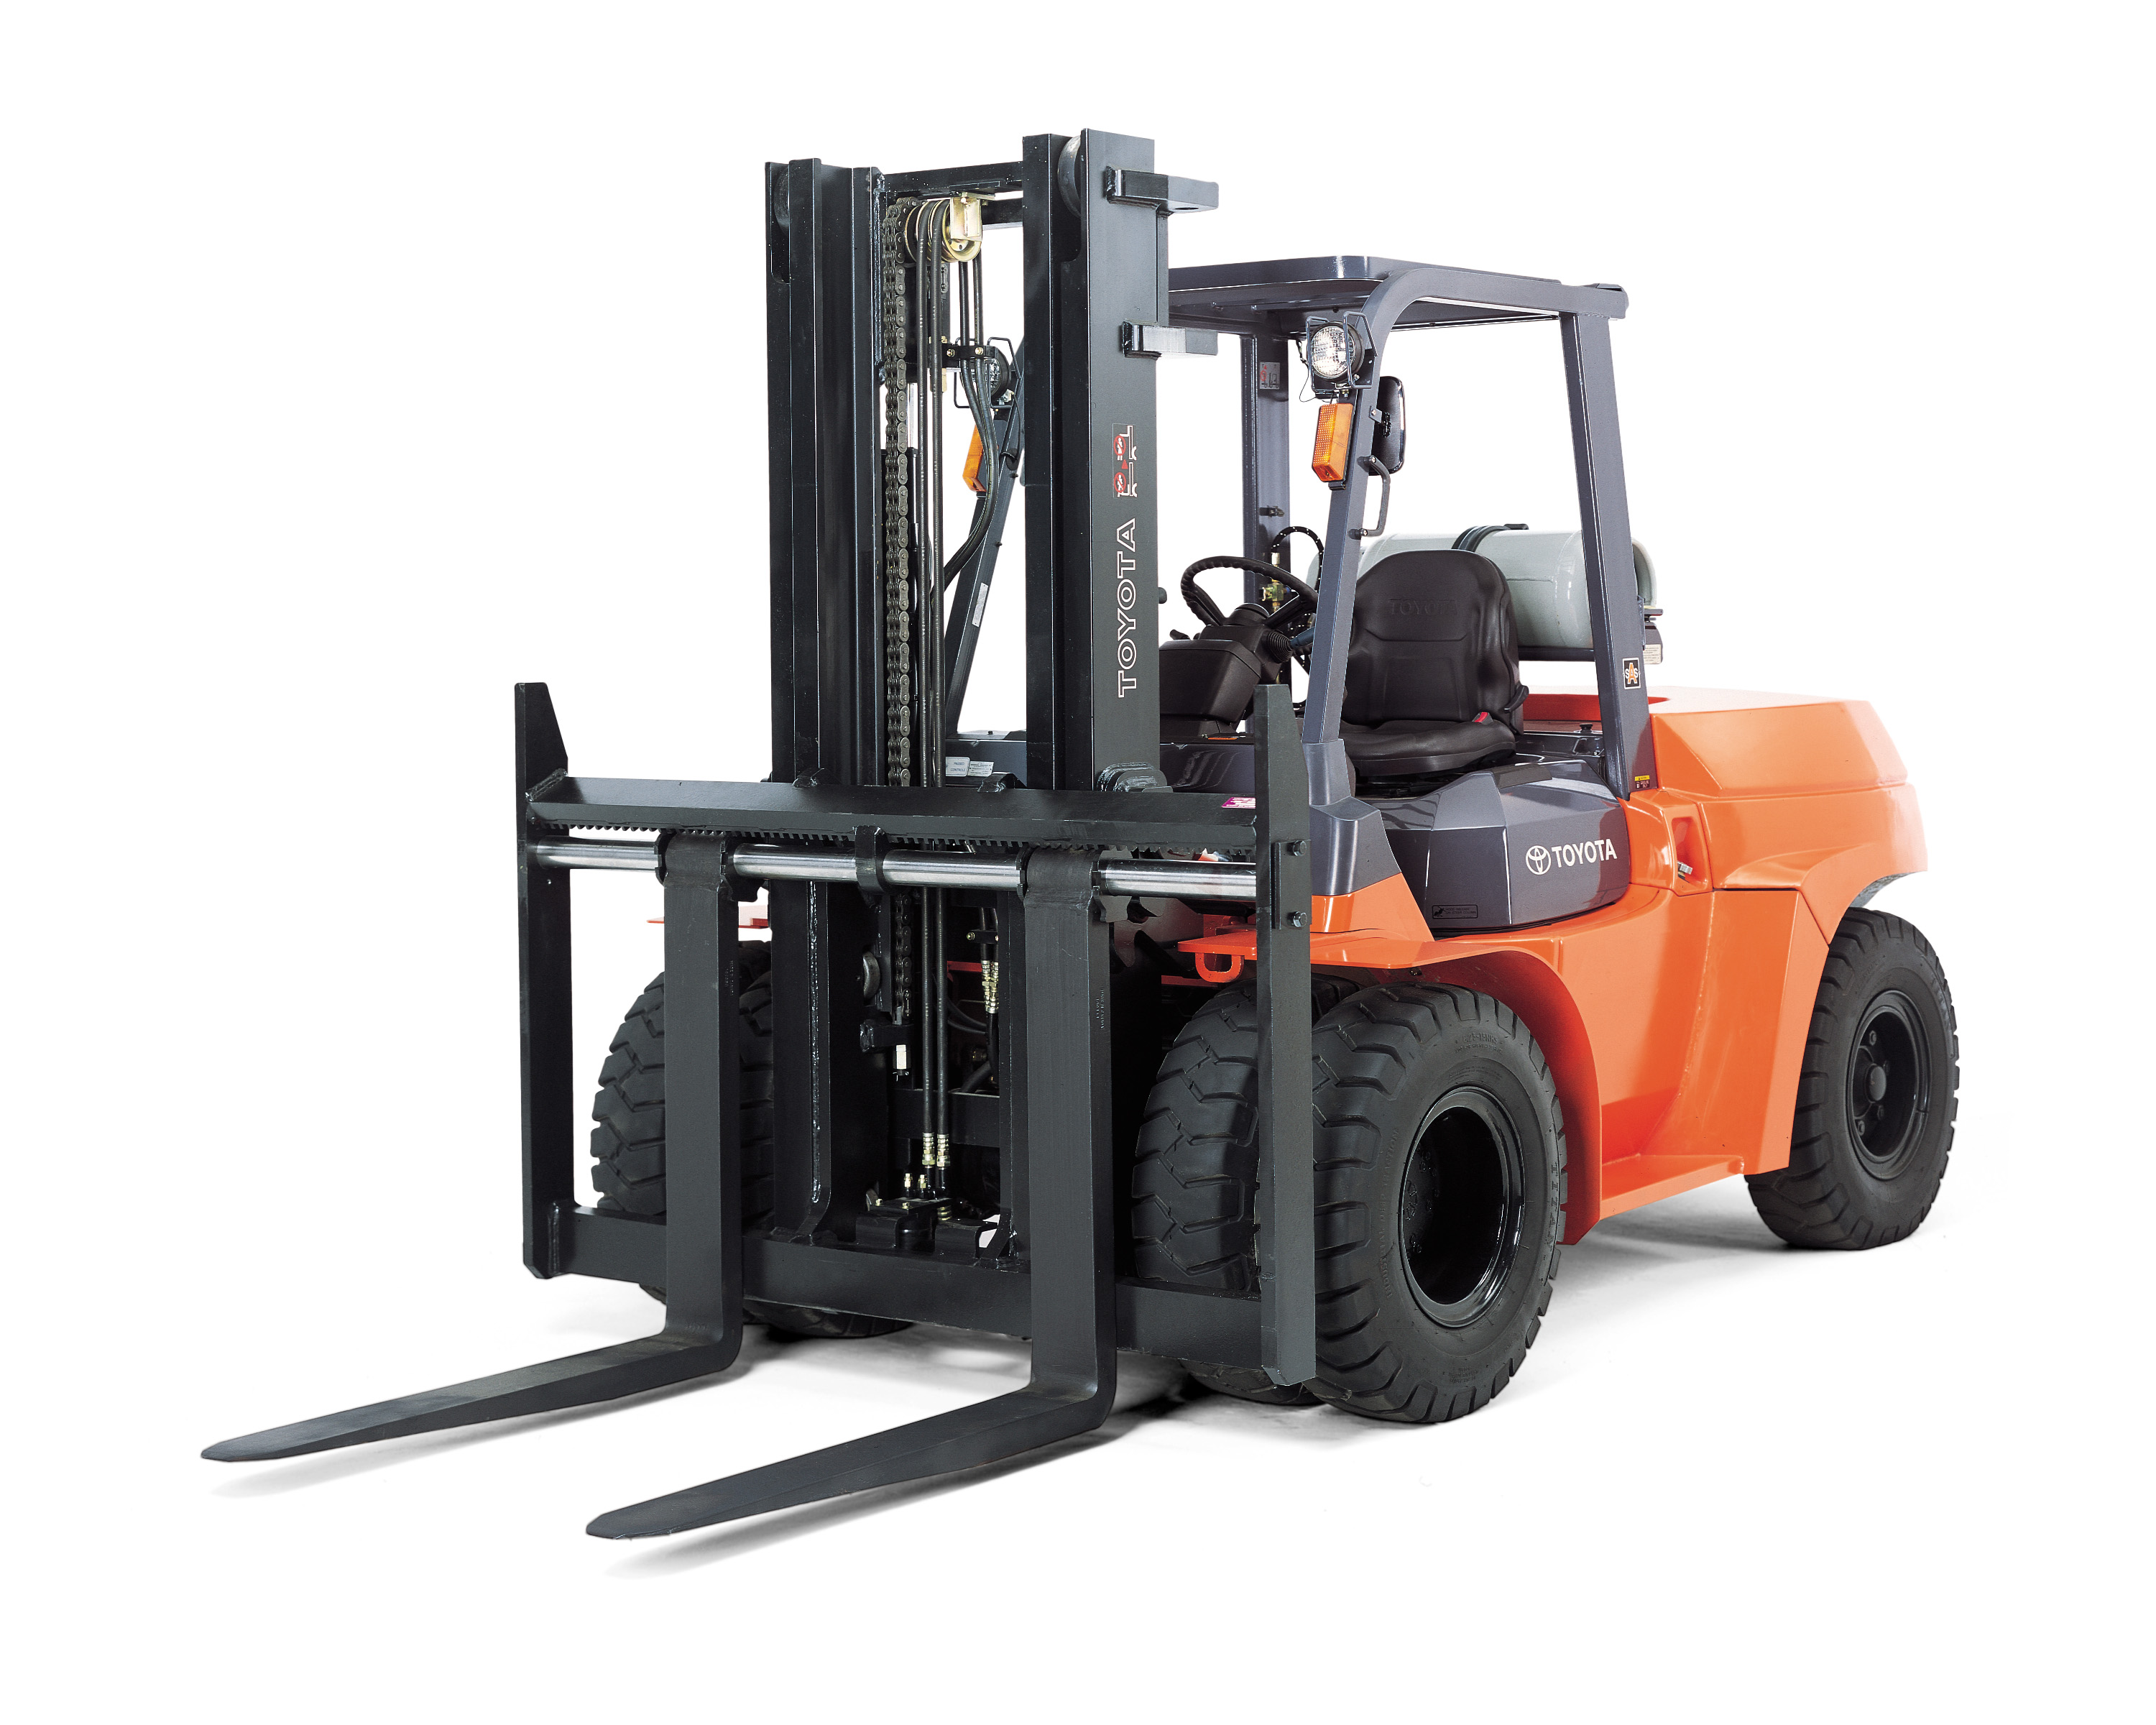 Toyota Forklift Wallpapers Vehicles Hq Toyota Forklift Pictures 4k Wallpapers 2019